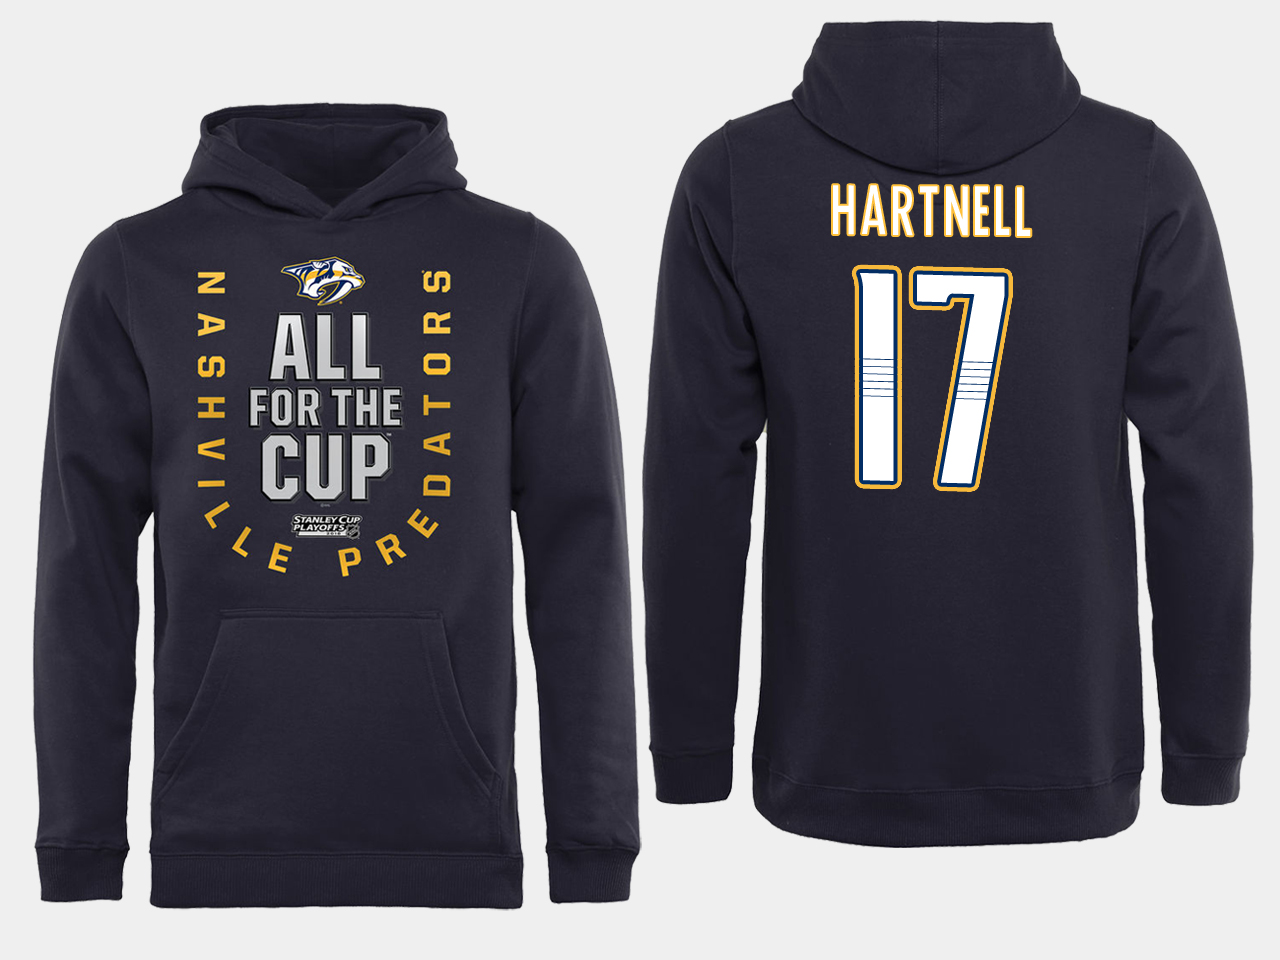 Men NHL Adidas Nashville Predators 17 Hartnell black ALL for the Cup hoodie